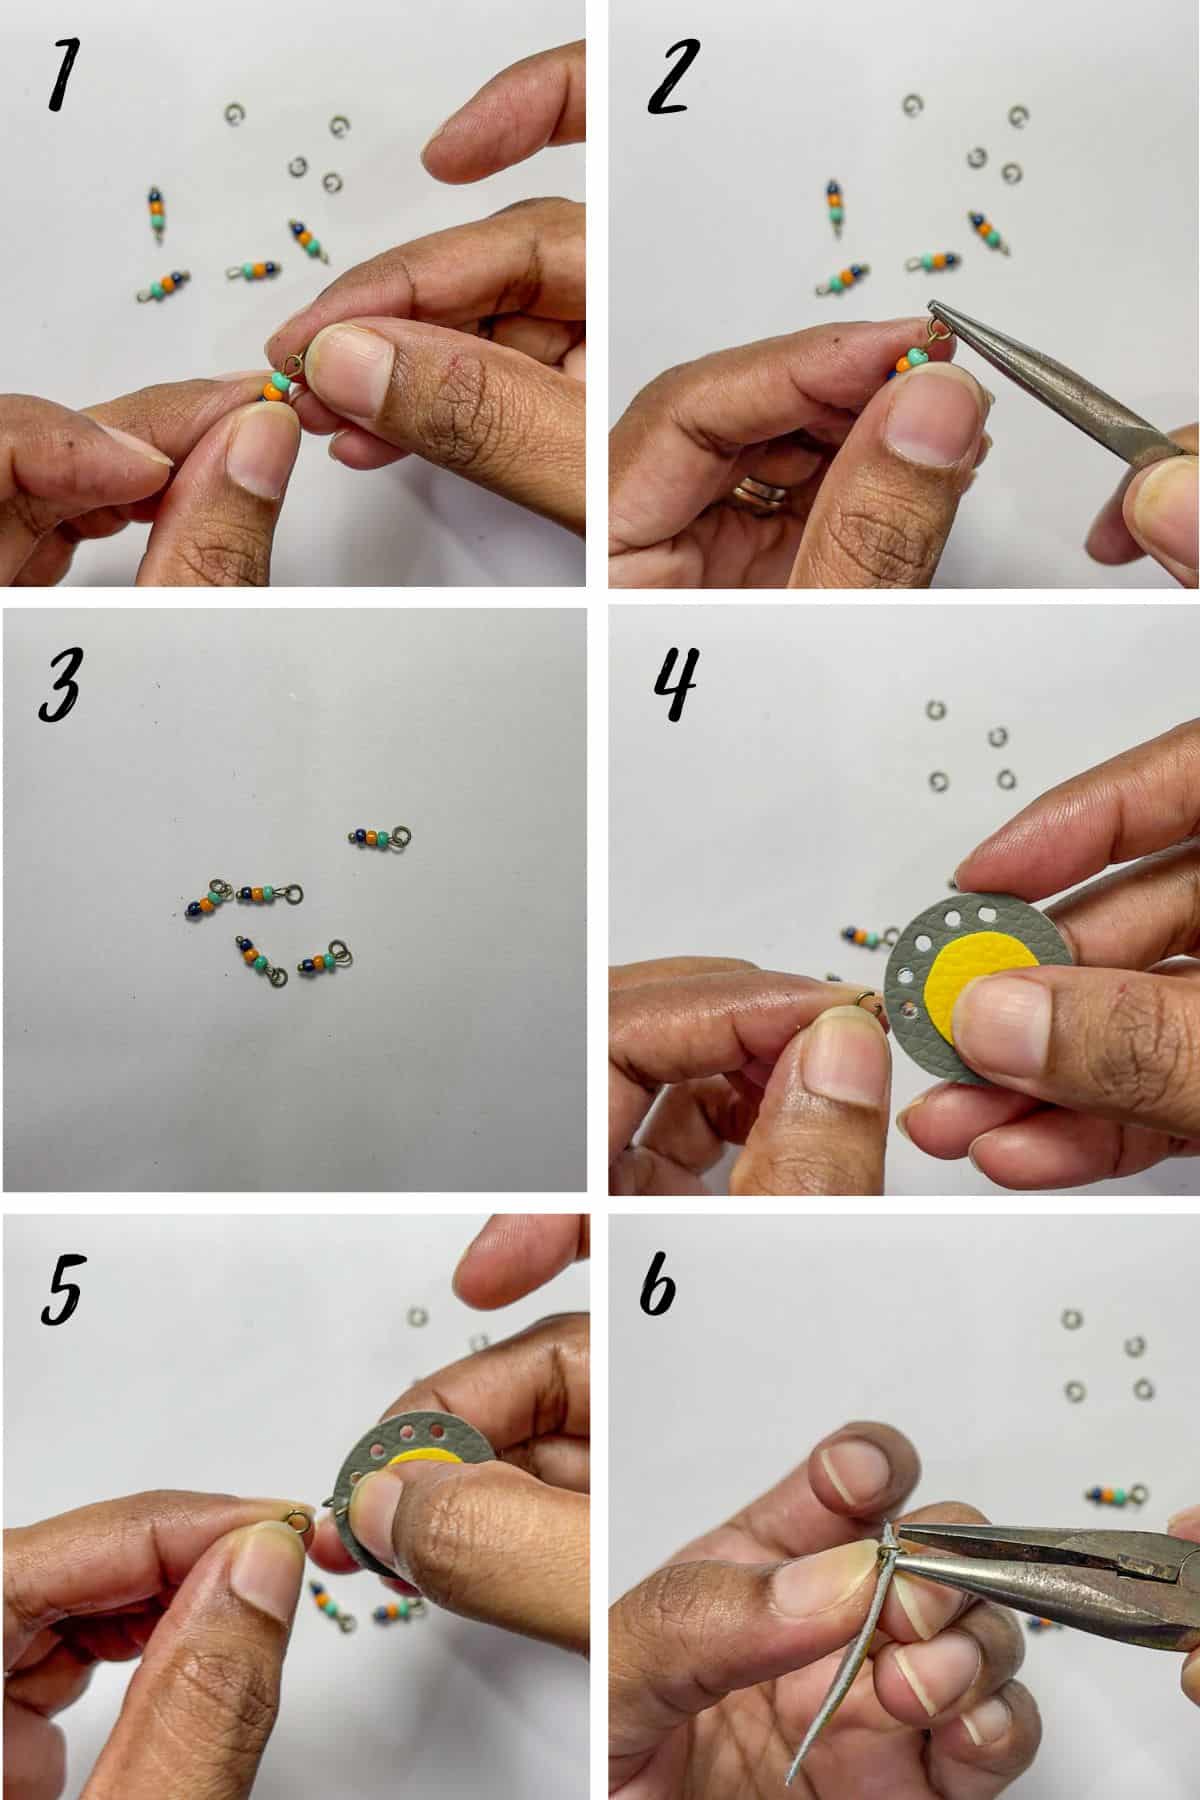 A poster of 6 images showing how to attached beads.